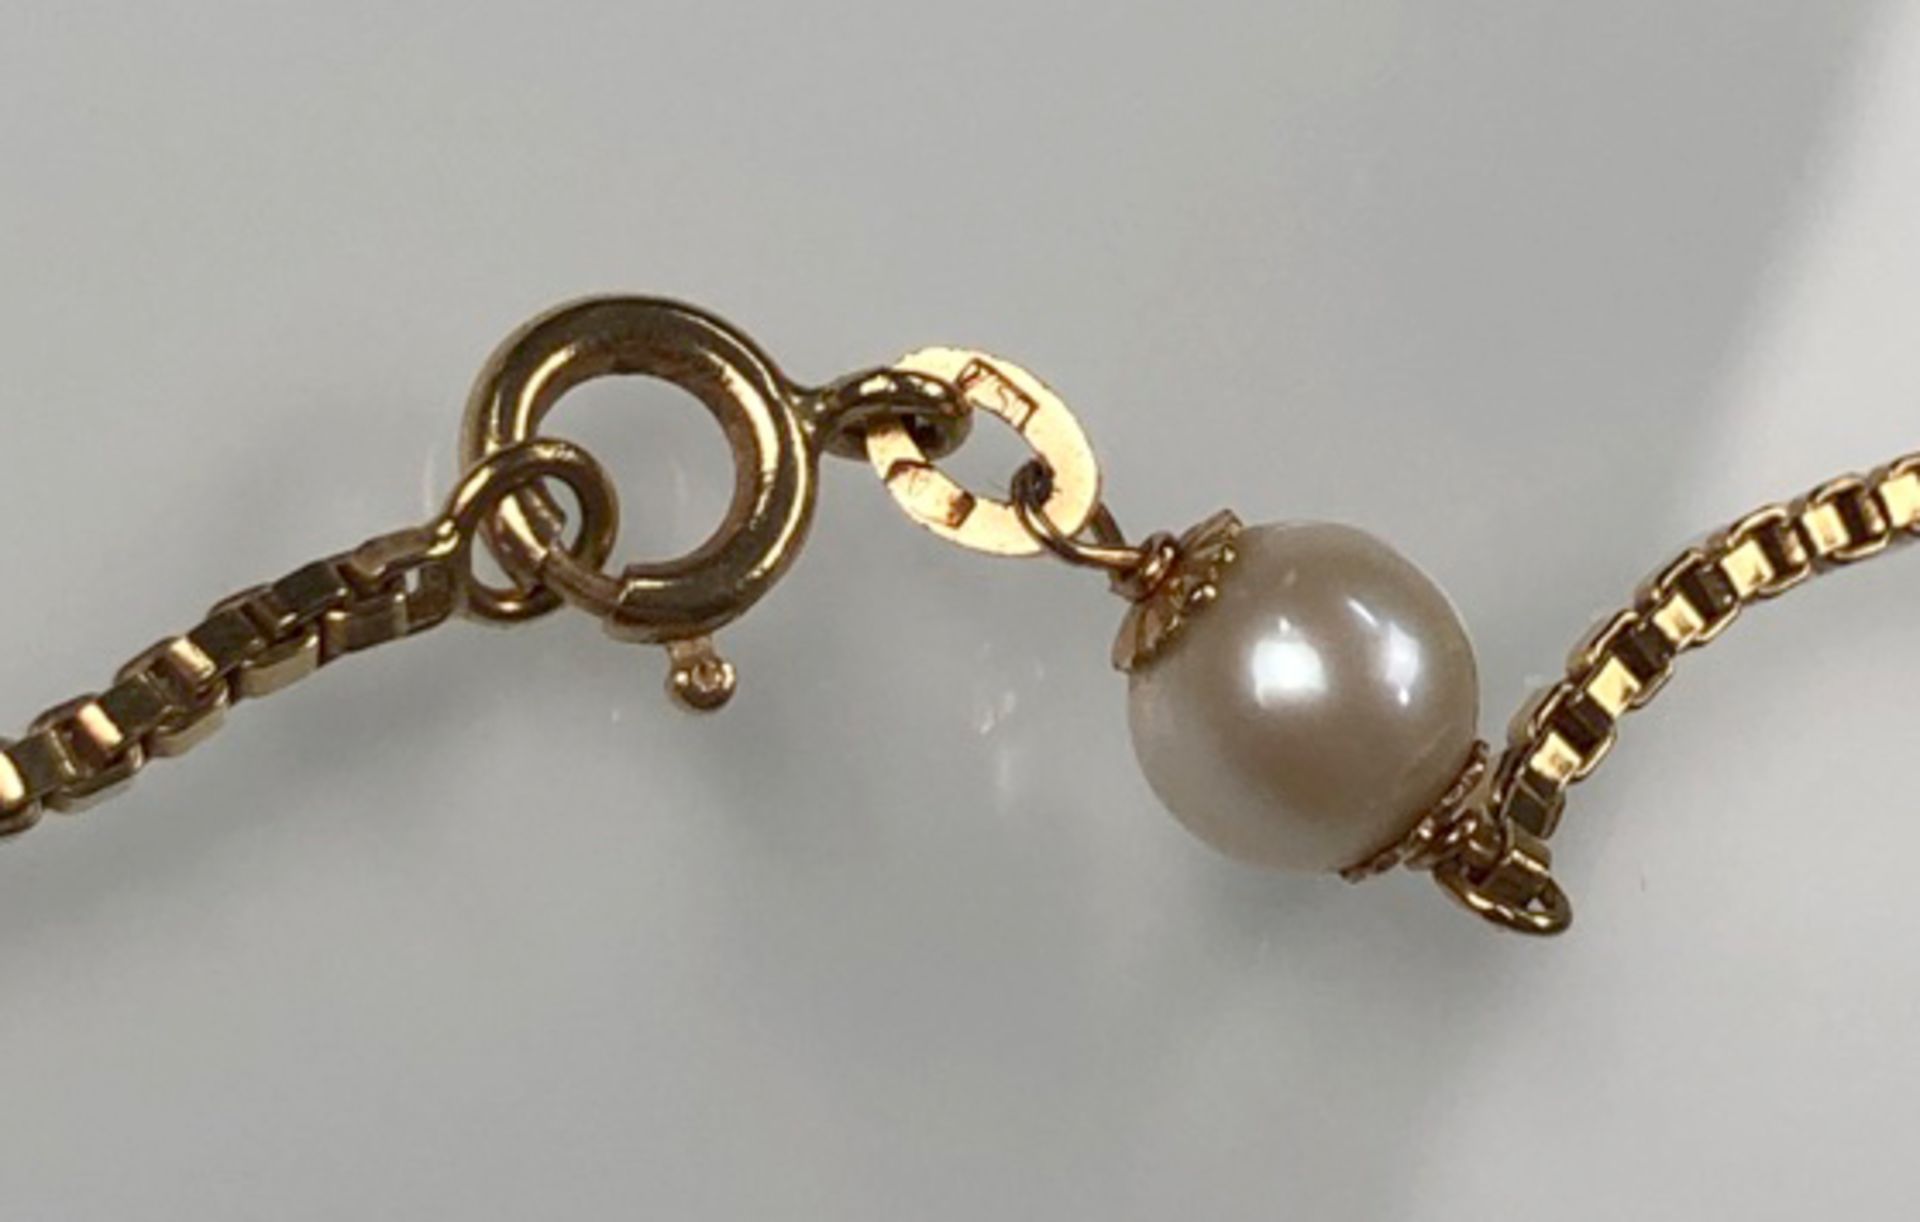 Necklace. Yellow gold 750 with cultured pearls. Gross 27.1 grams. - Image 5 of 10